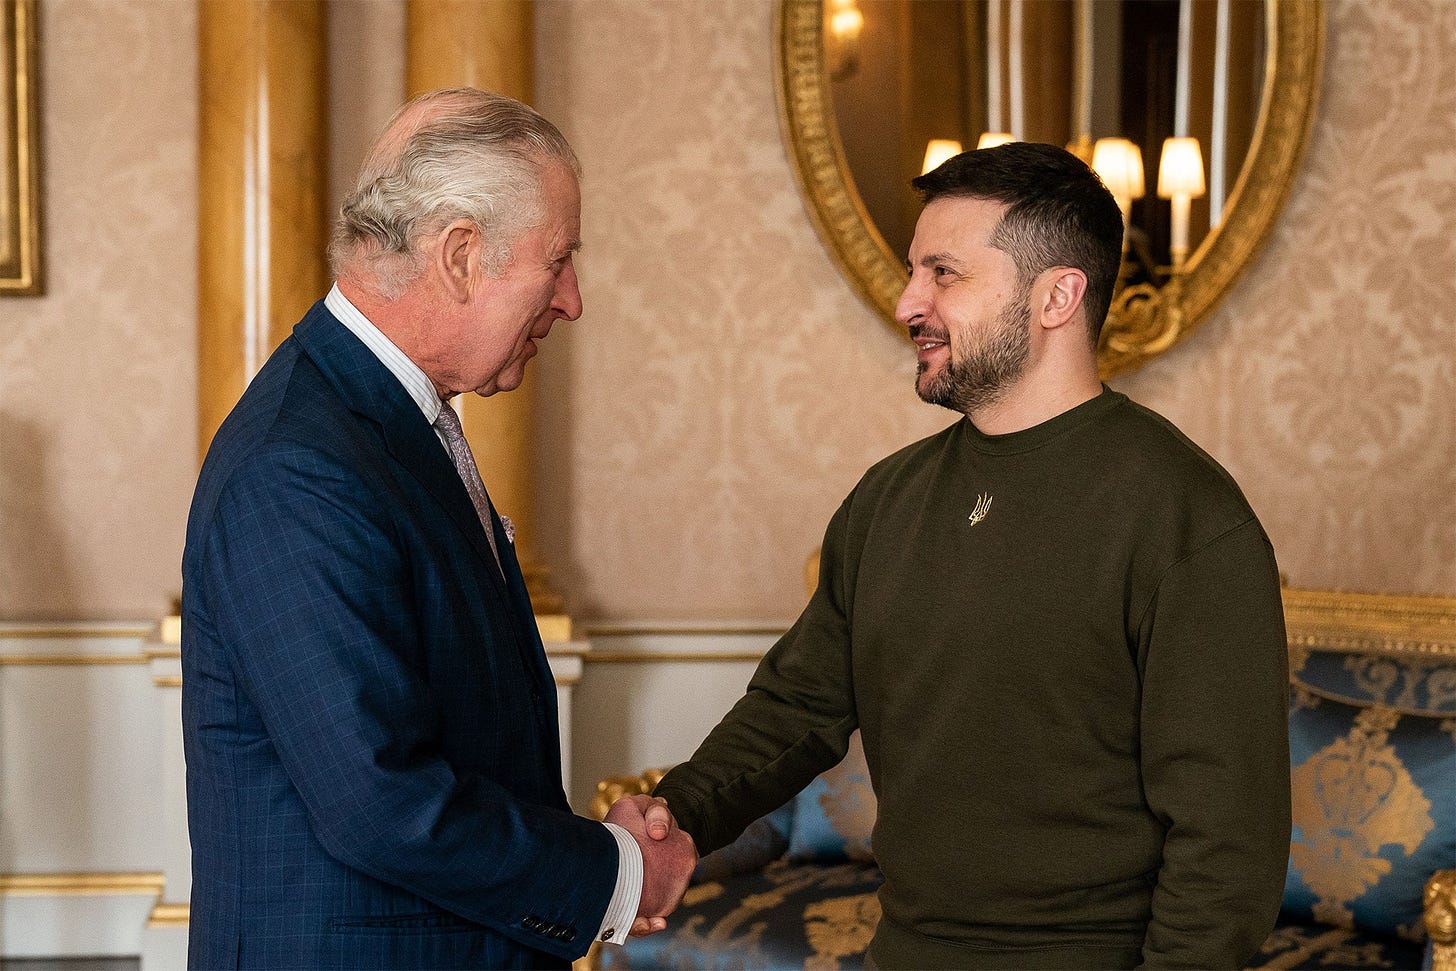 President Zelensky unites with King Charles III in historic meeting at  Buckingham Palace | Tatler